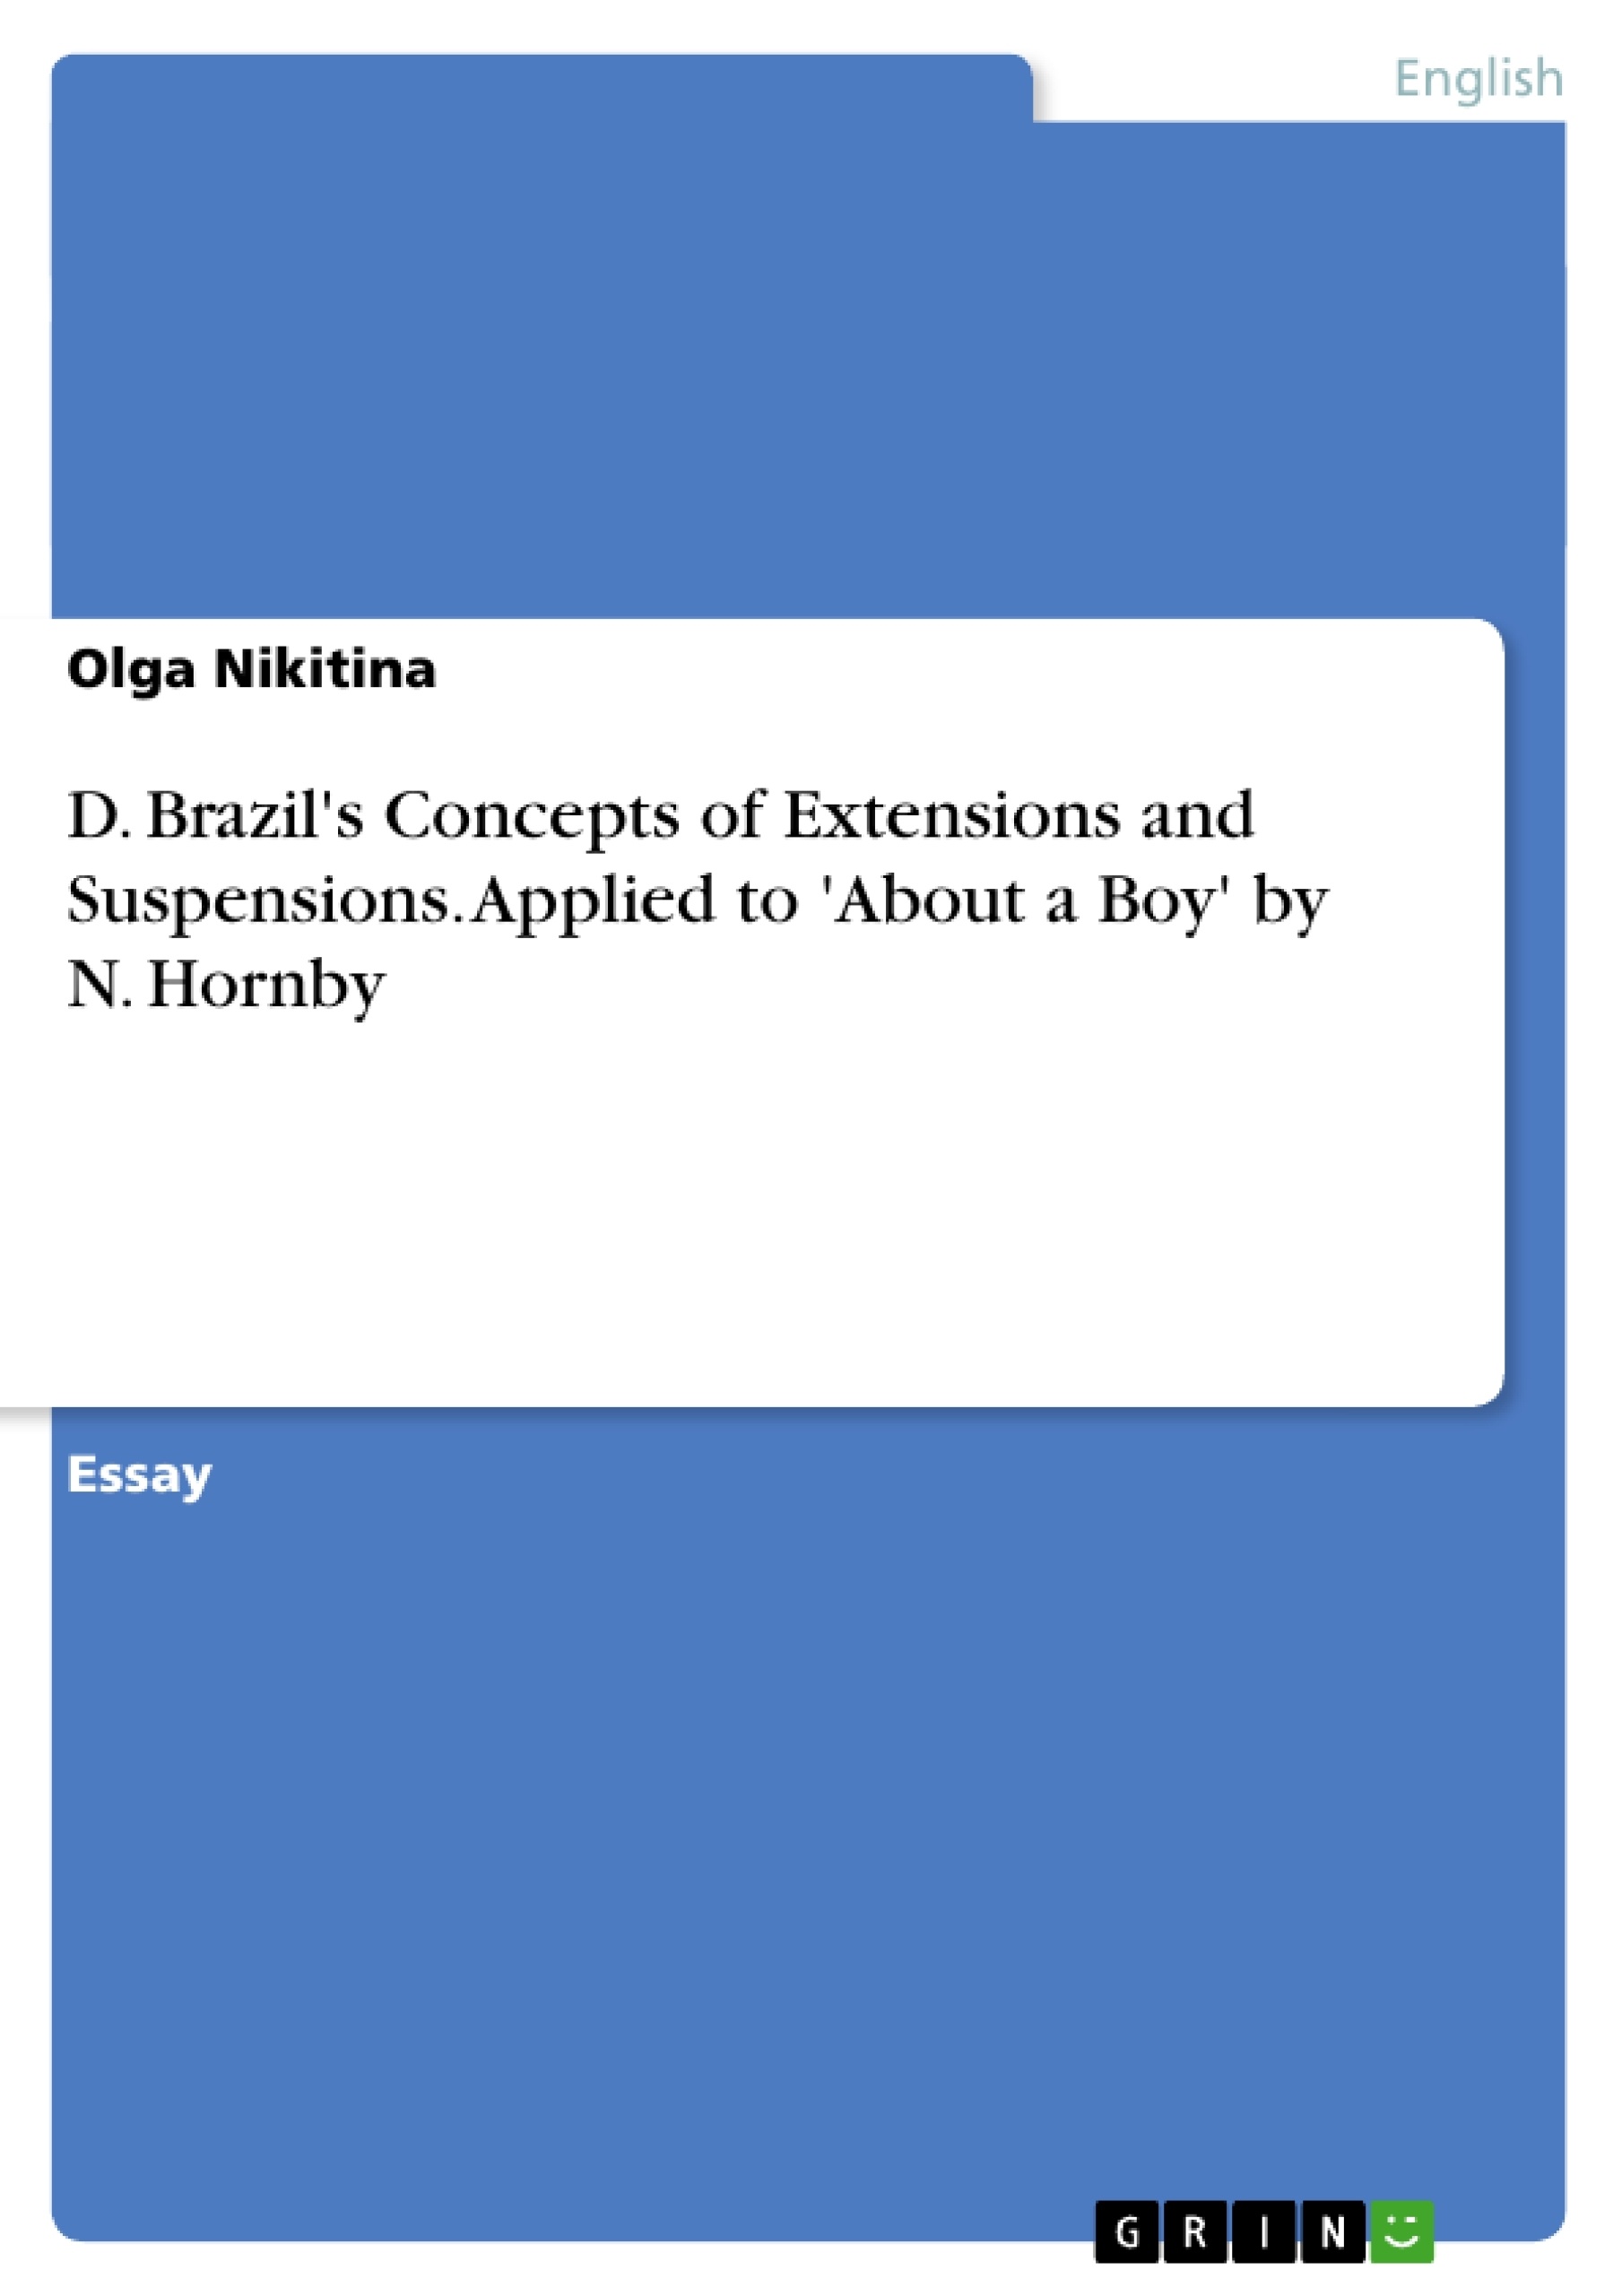 Título: D. Brazil's Concepts of Extensions and Suspensions. Applied to 'About a Boy' by N. Hornby